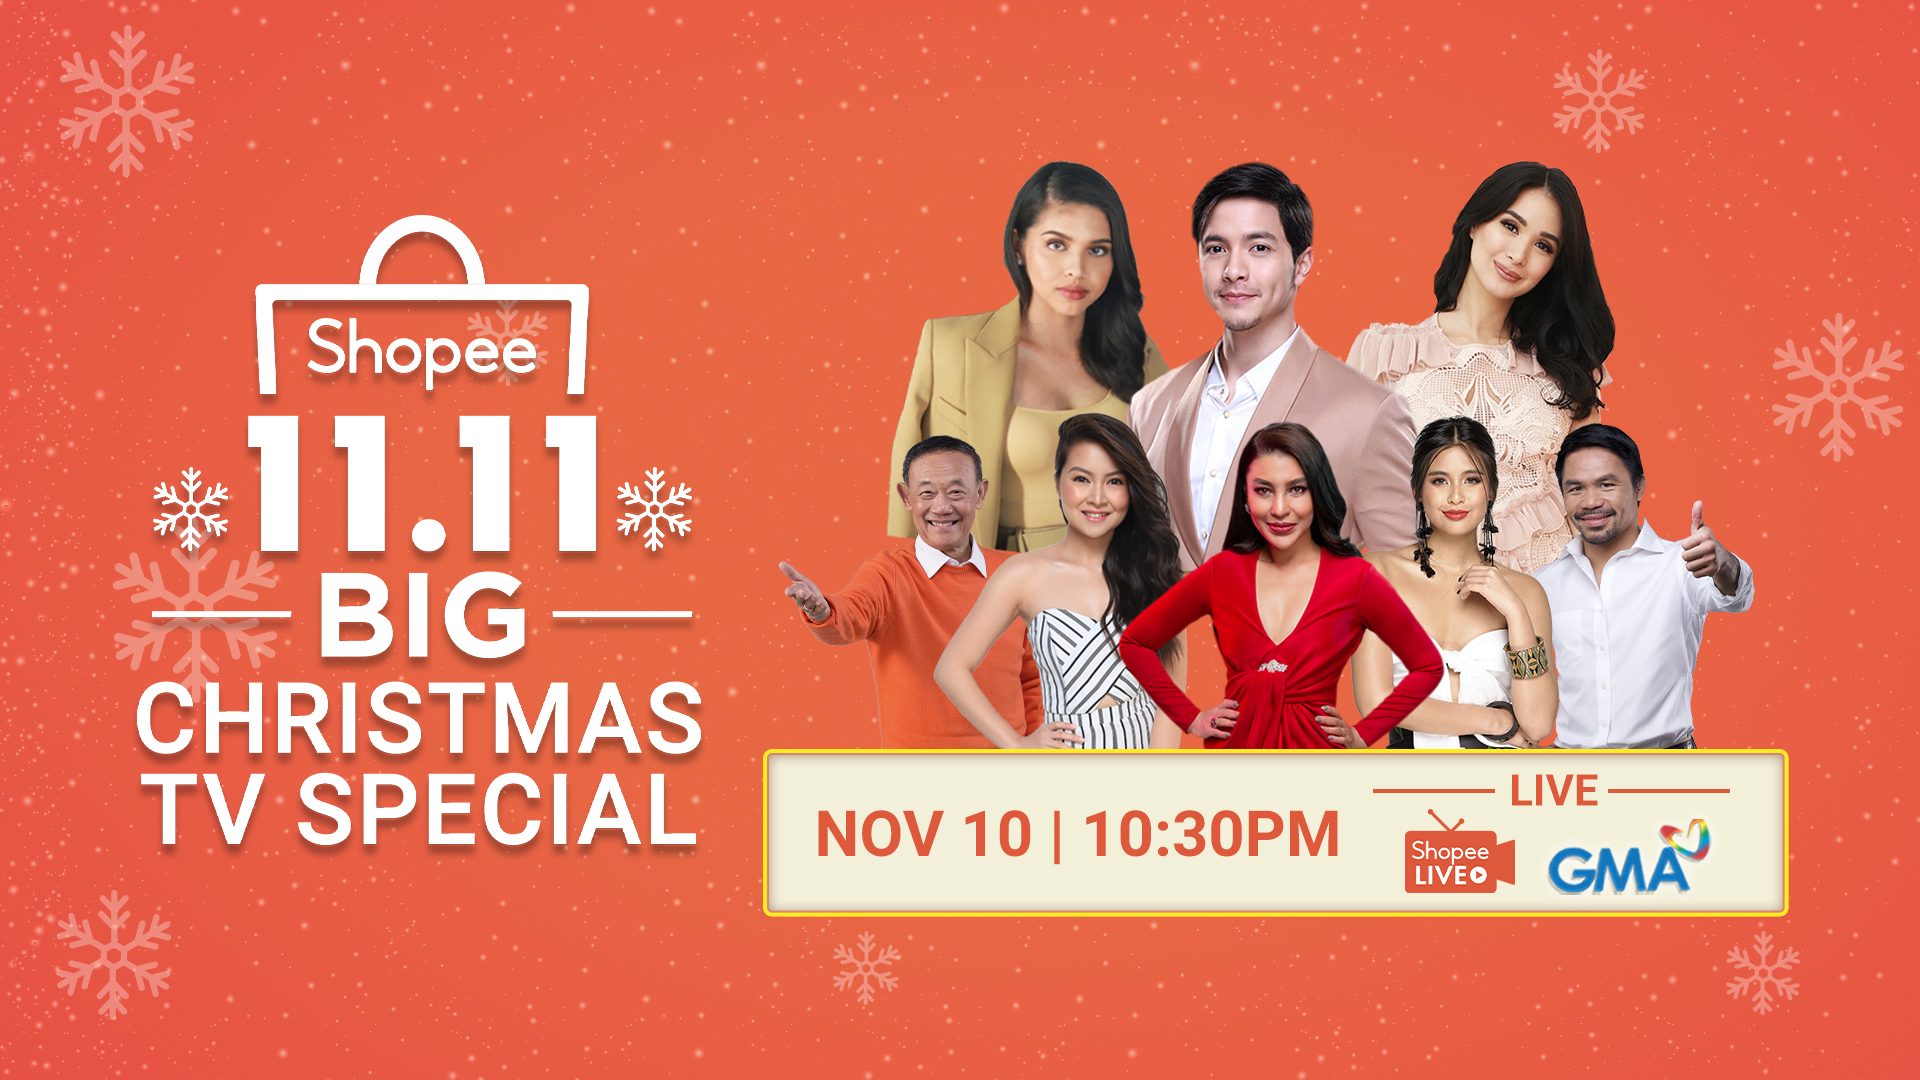 Shopee holds its first-ever 11.11 big Christmas TV special